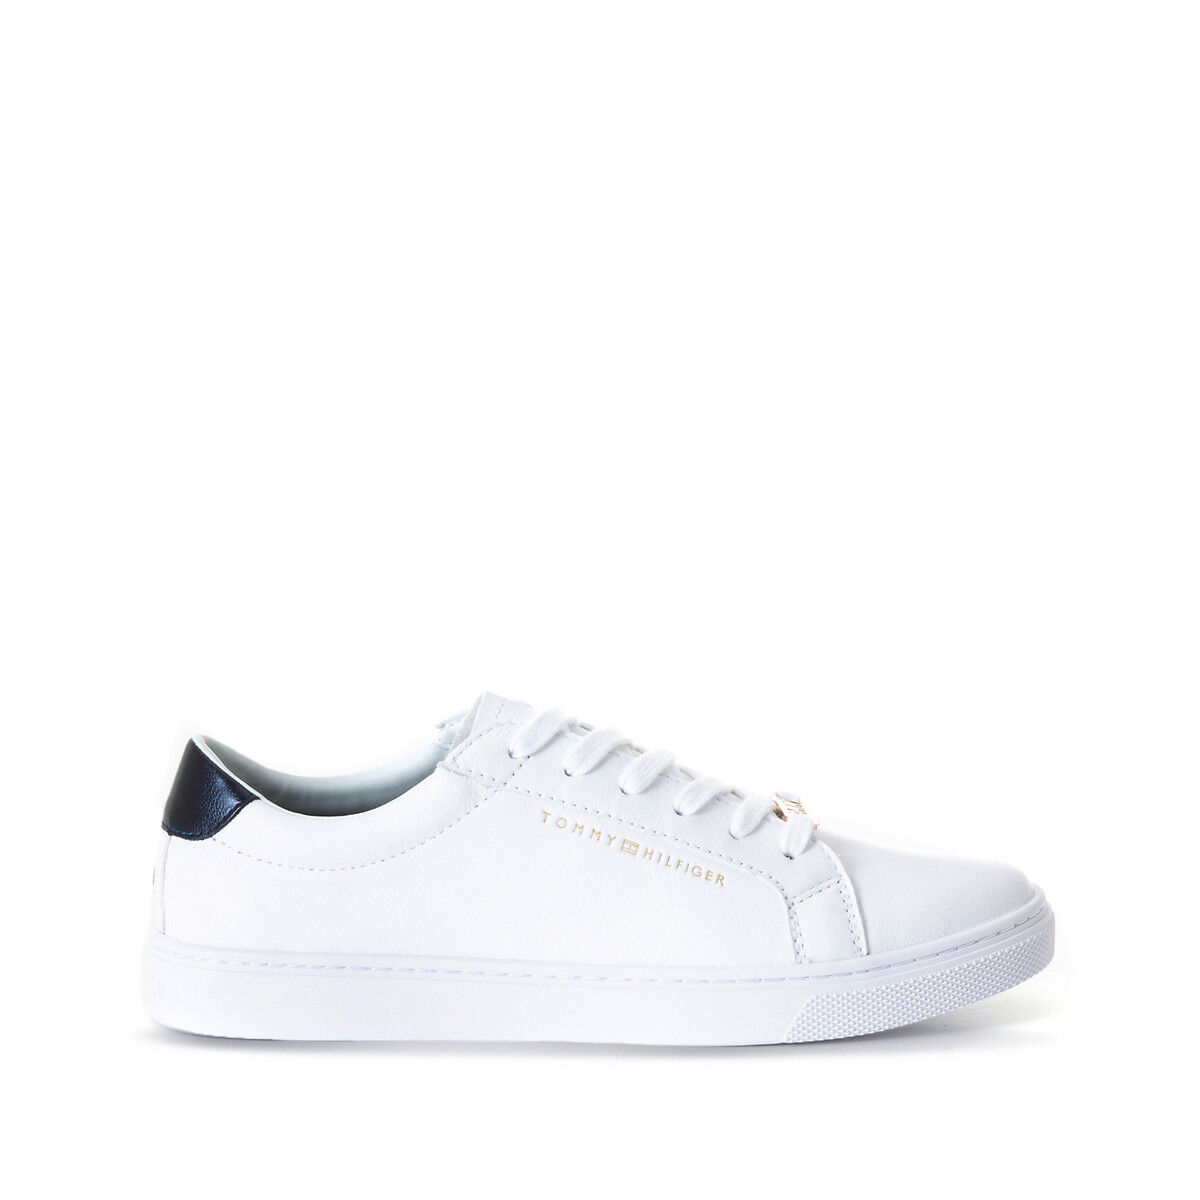 Venus 22a Leather Trainers